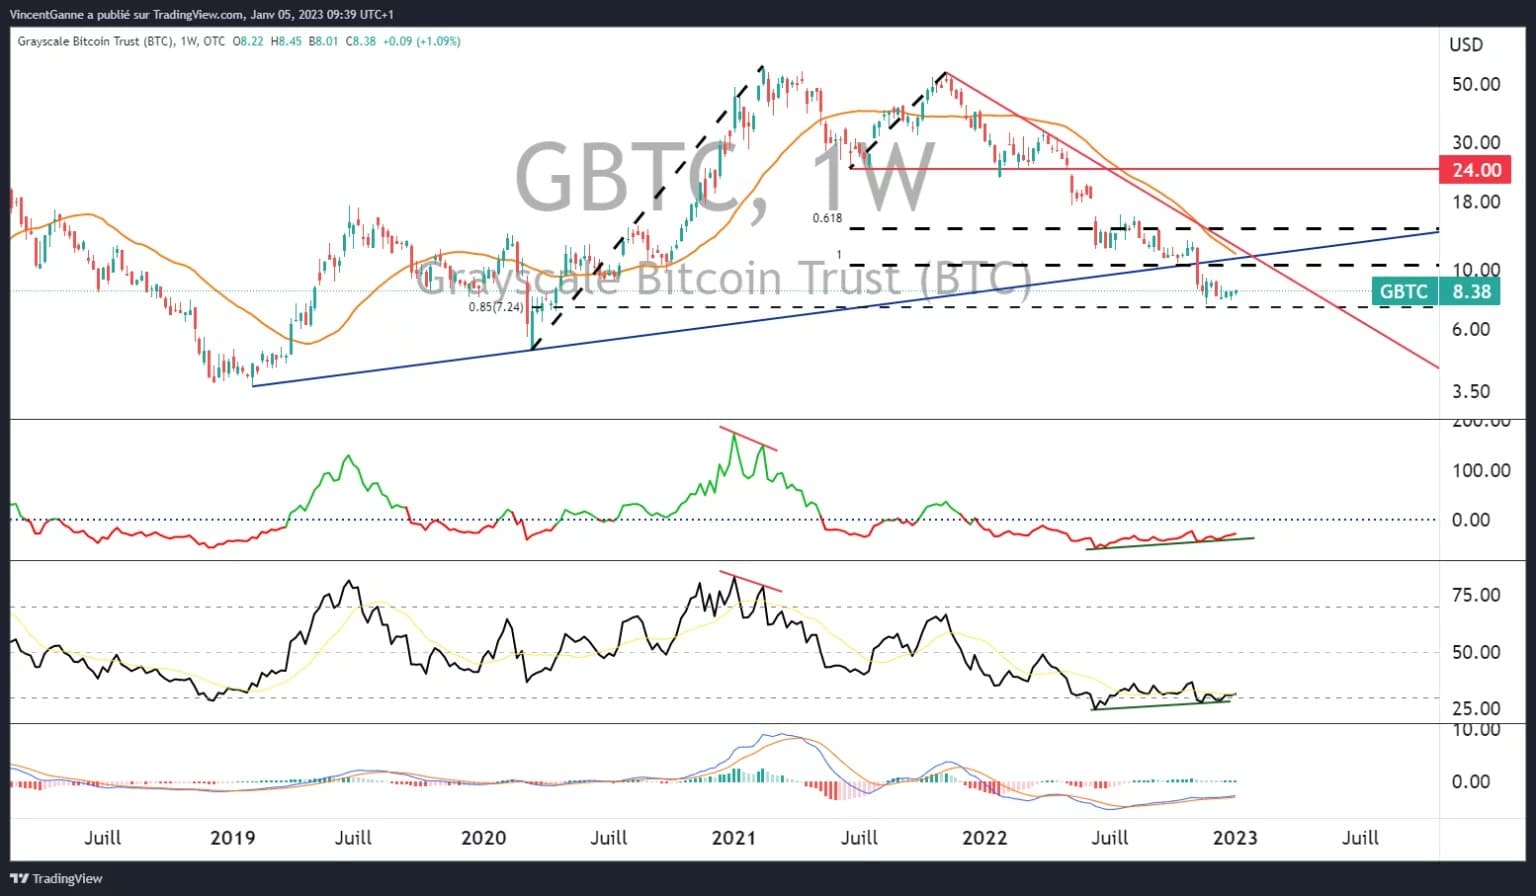 Chart exposing the Japanese candlesticks in weekly data of the Grayscale Bitcoin fund